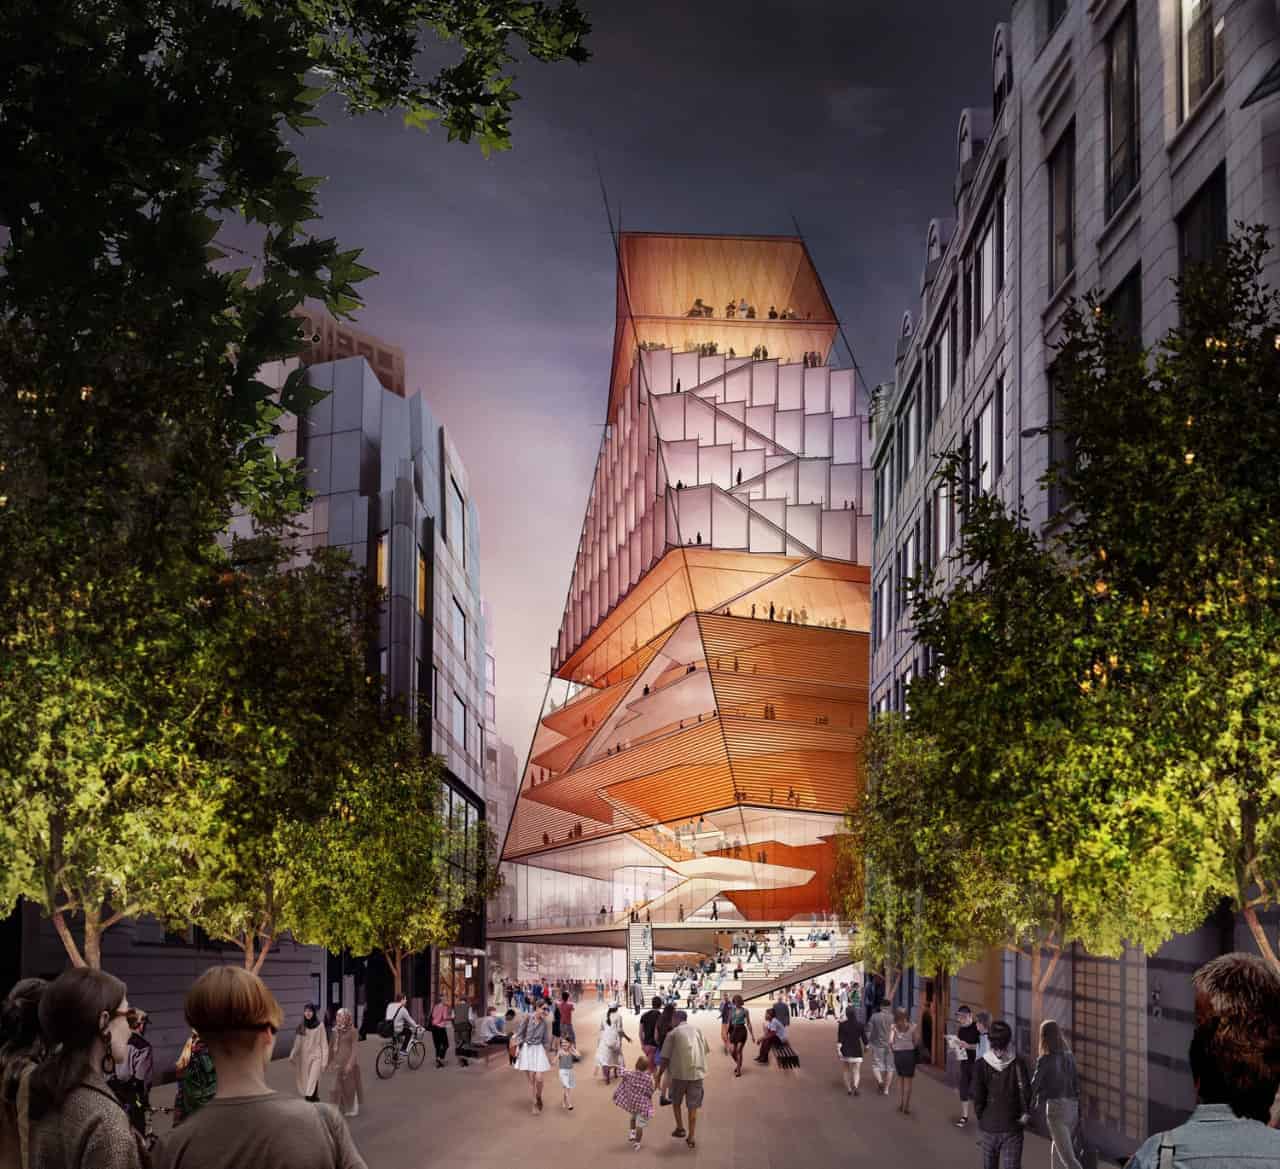 An artist’s impression of what was to have been the Centre for Music in central London